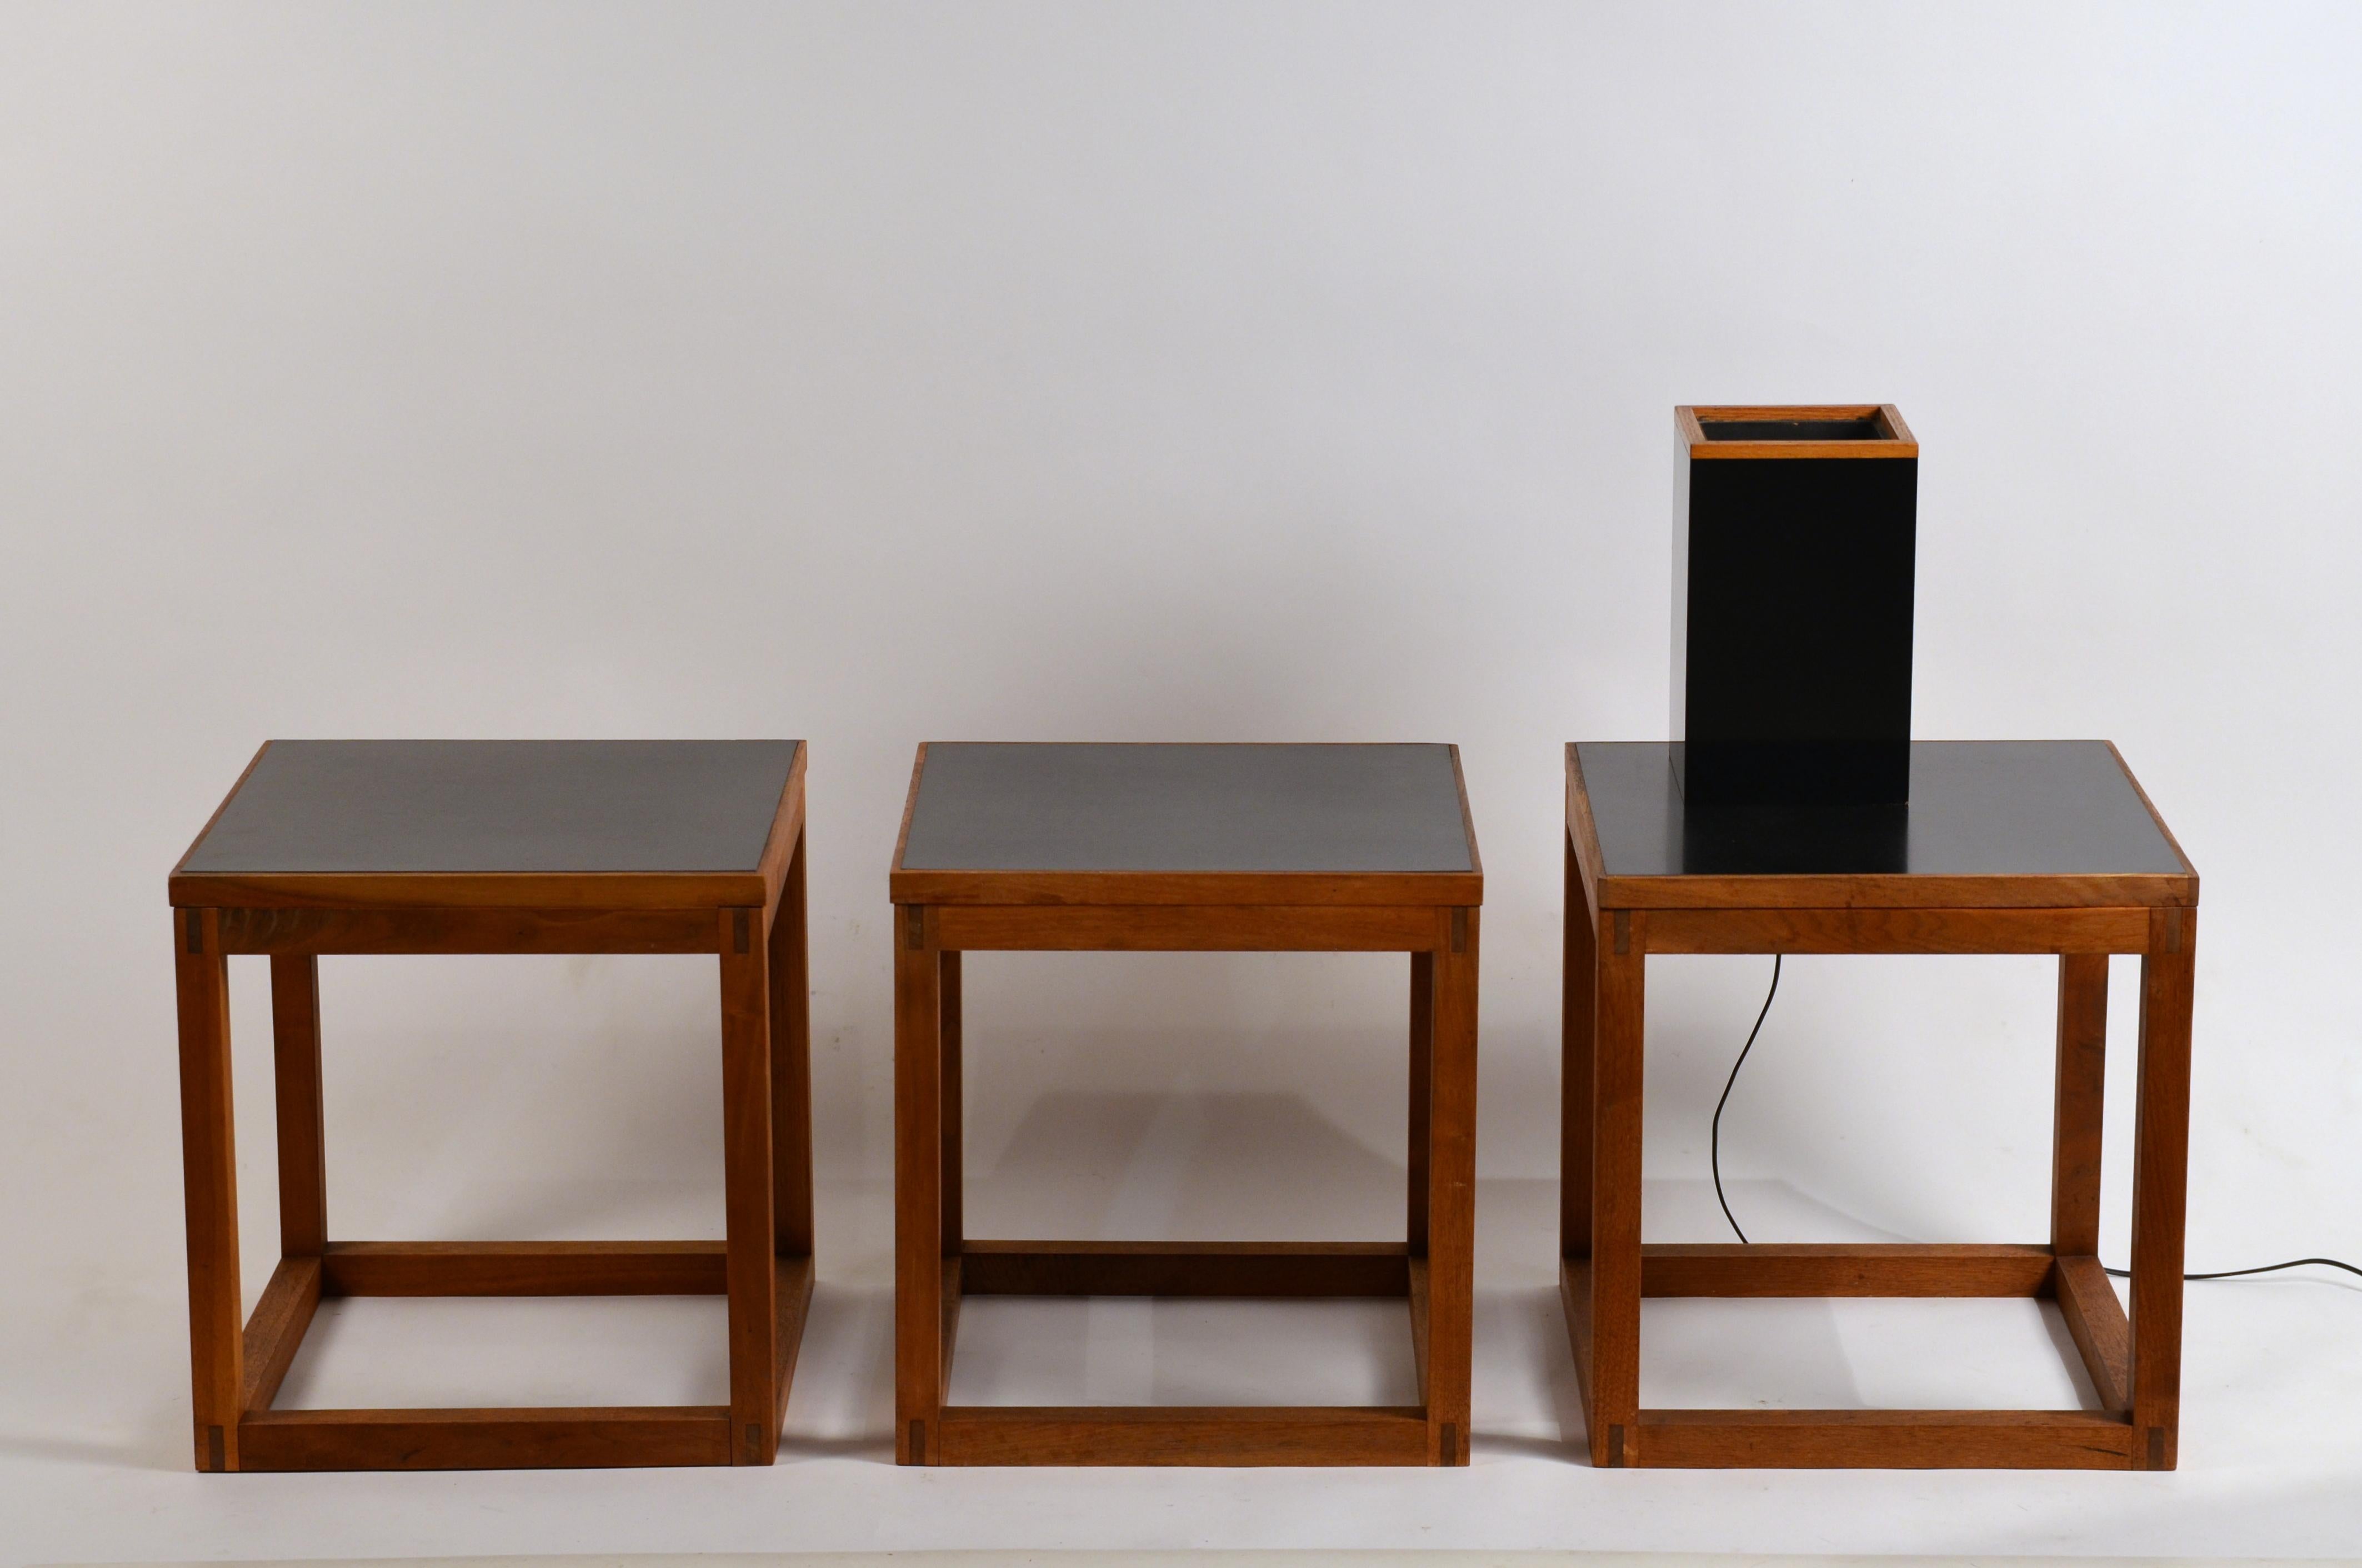 Set of 3 Minimal Teak and Laminate Cube Coffee table or Side Tables In Excellent Condition For Sale In Los Angeles, CA